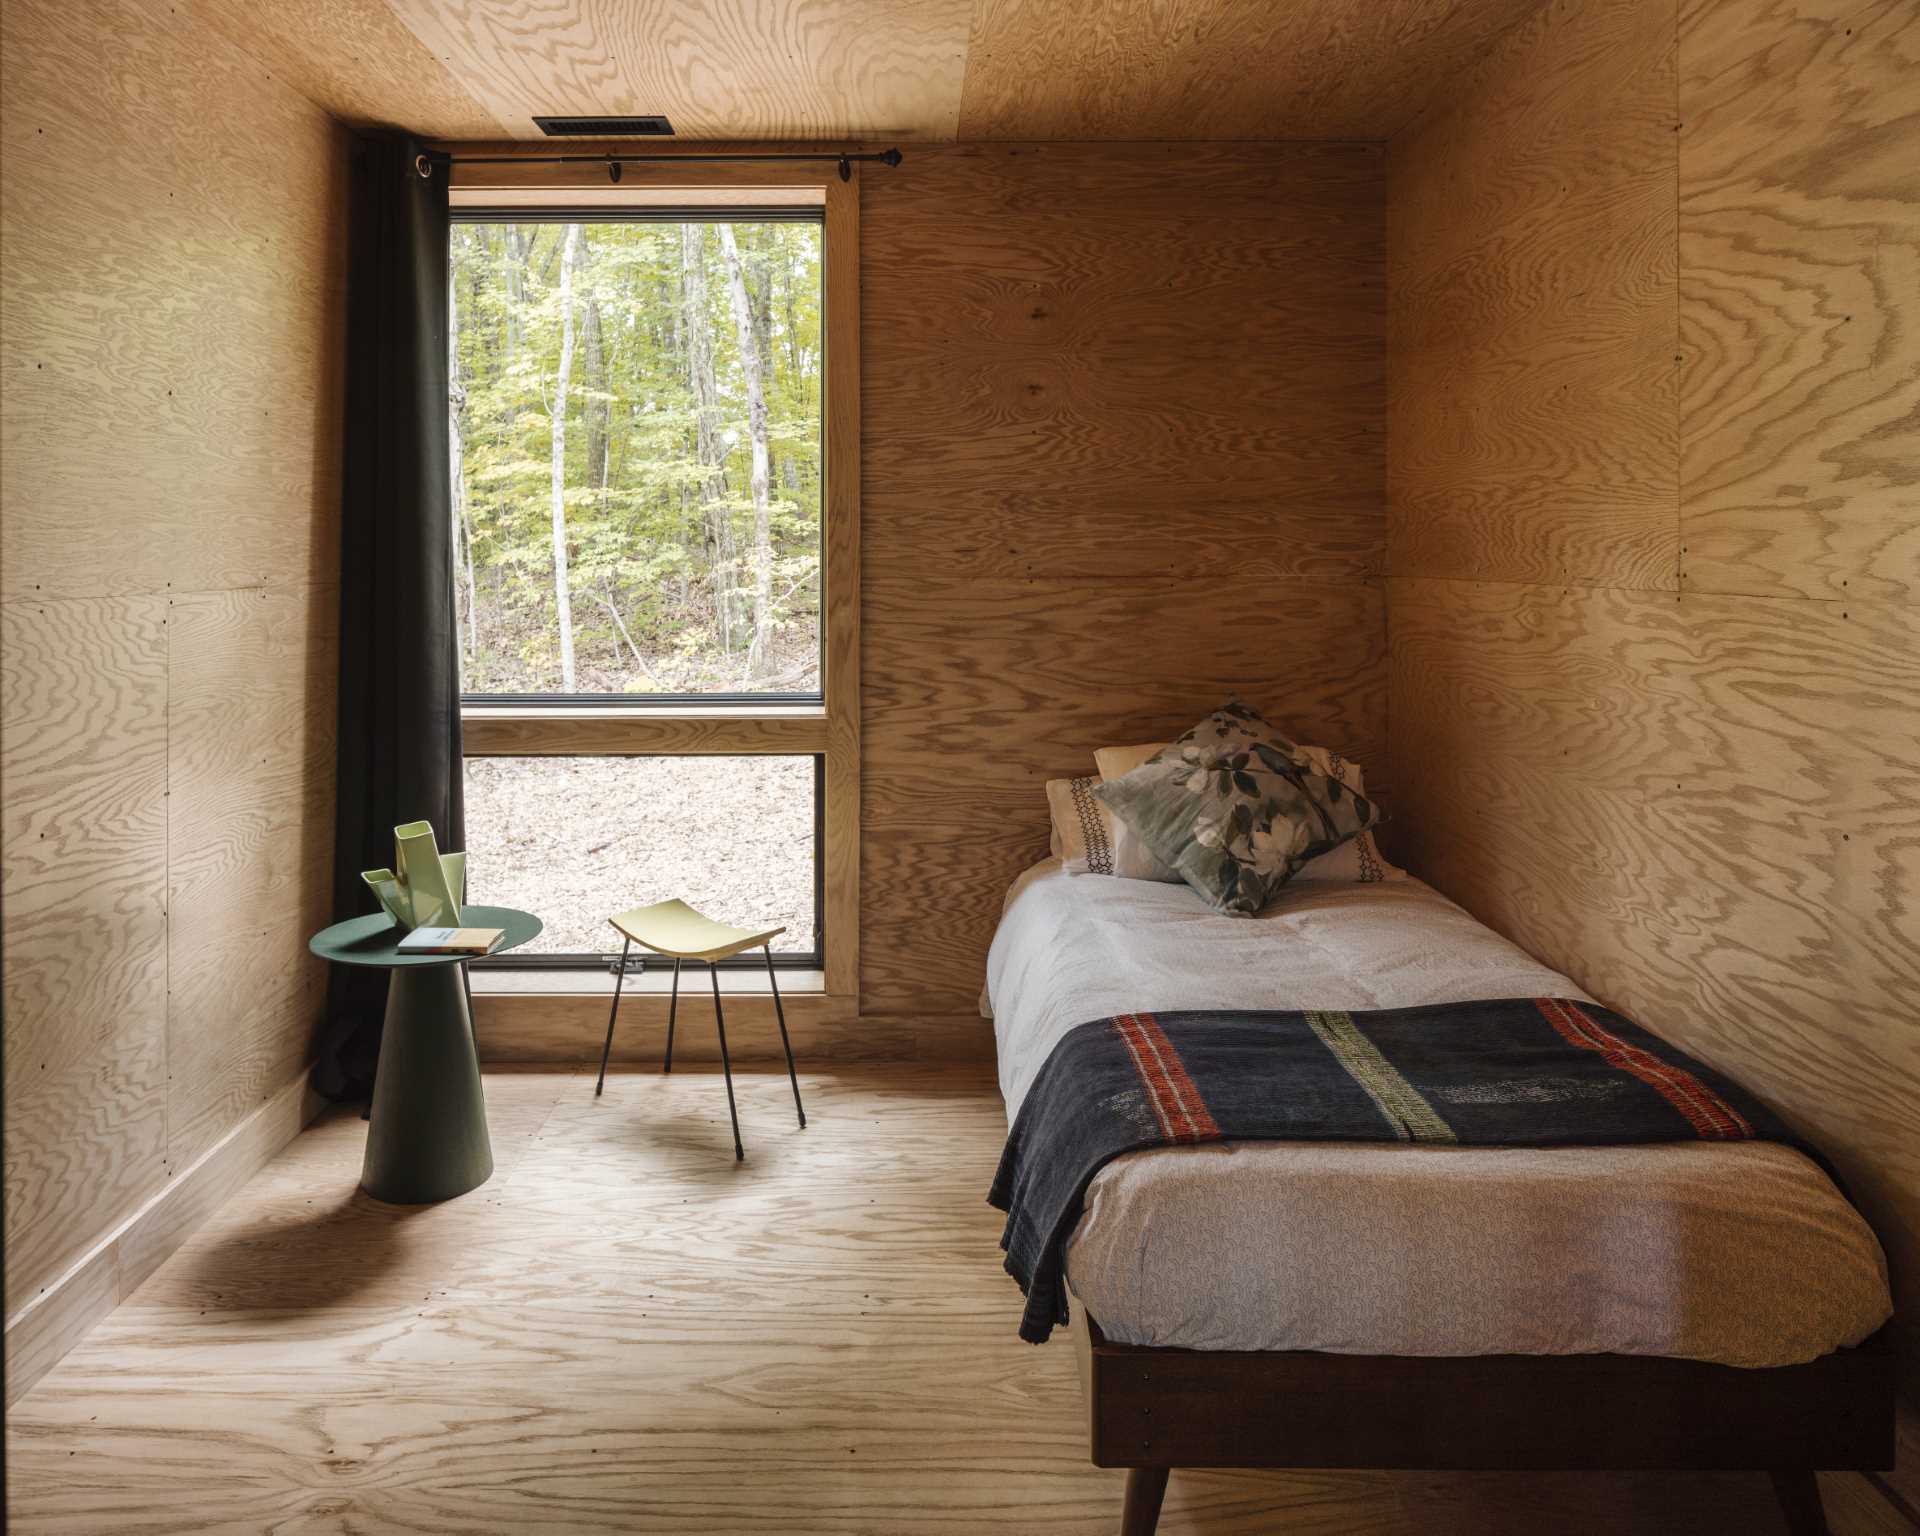 A bedroom lined with wood include a vertical window for natural light and views of the trees.